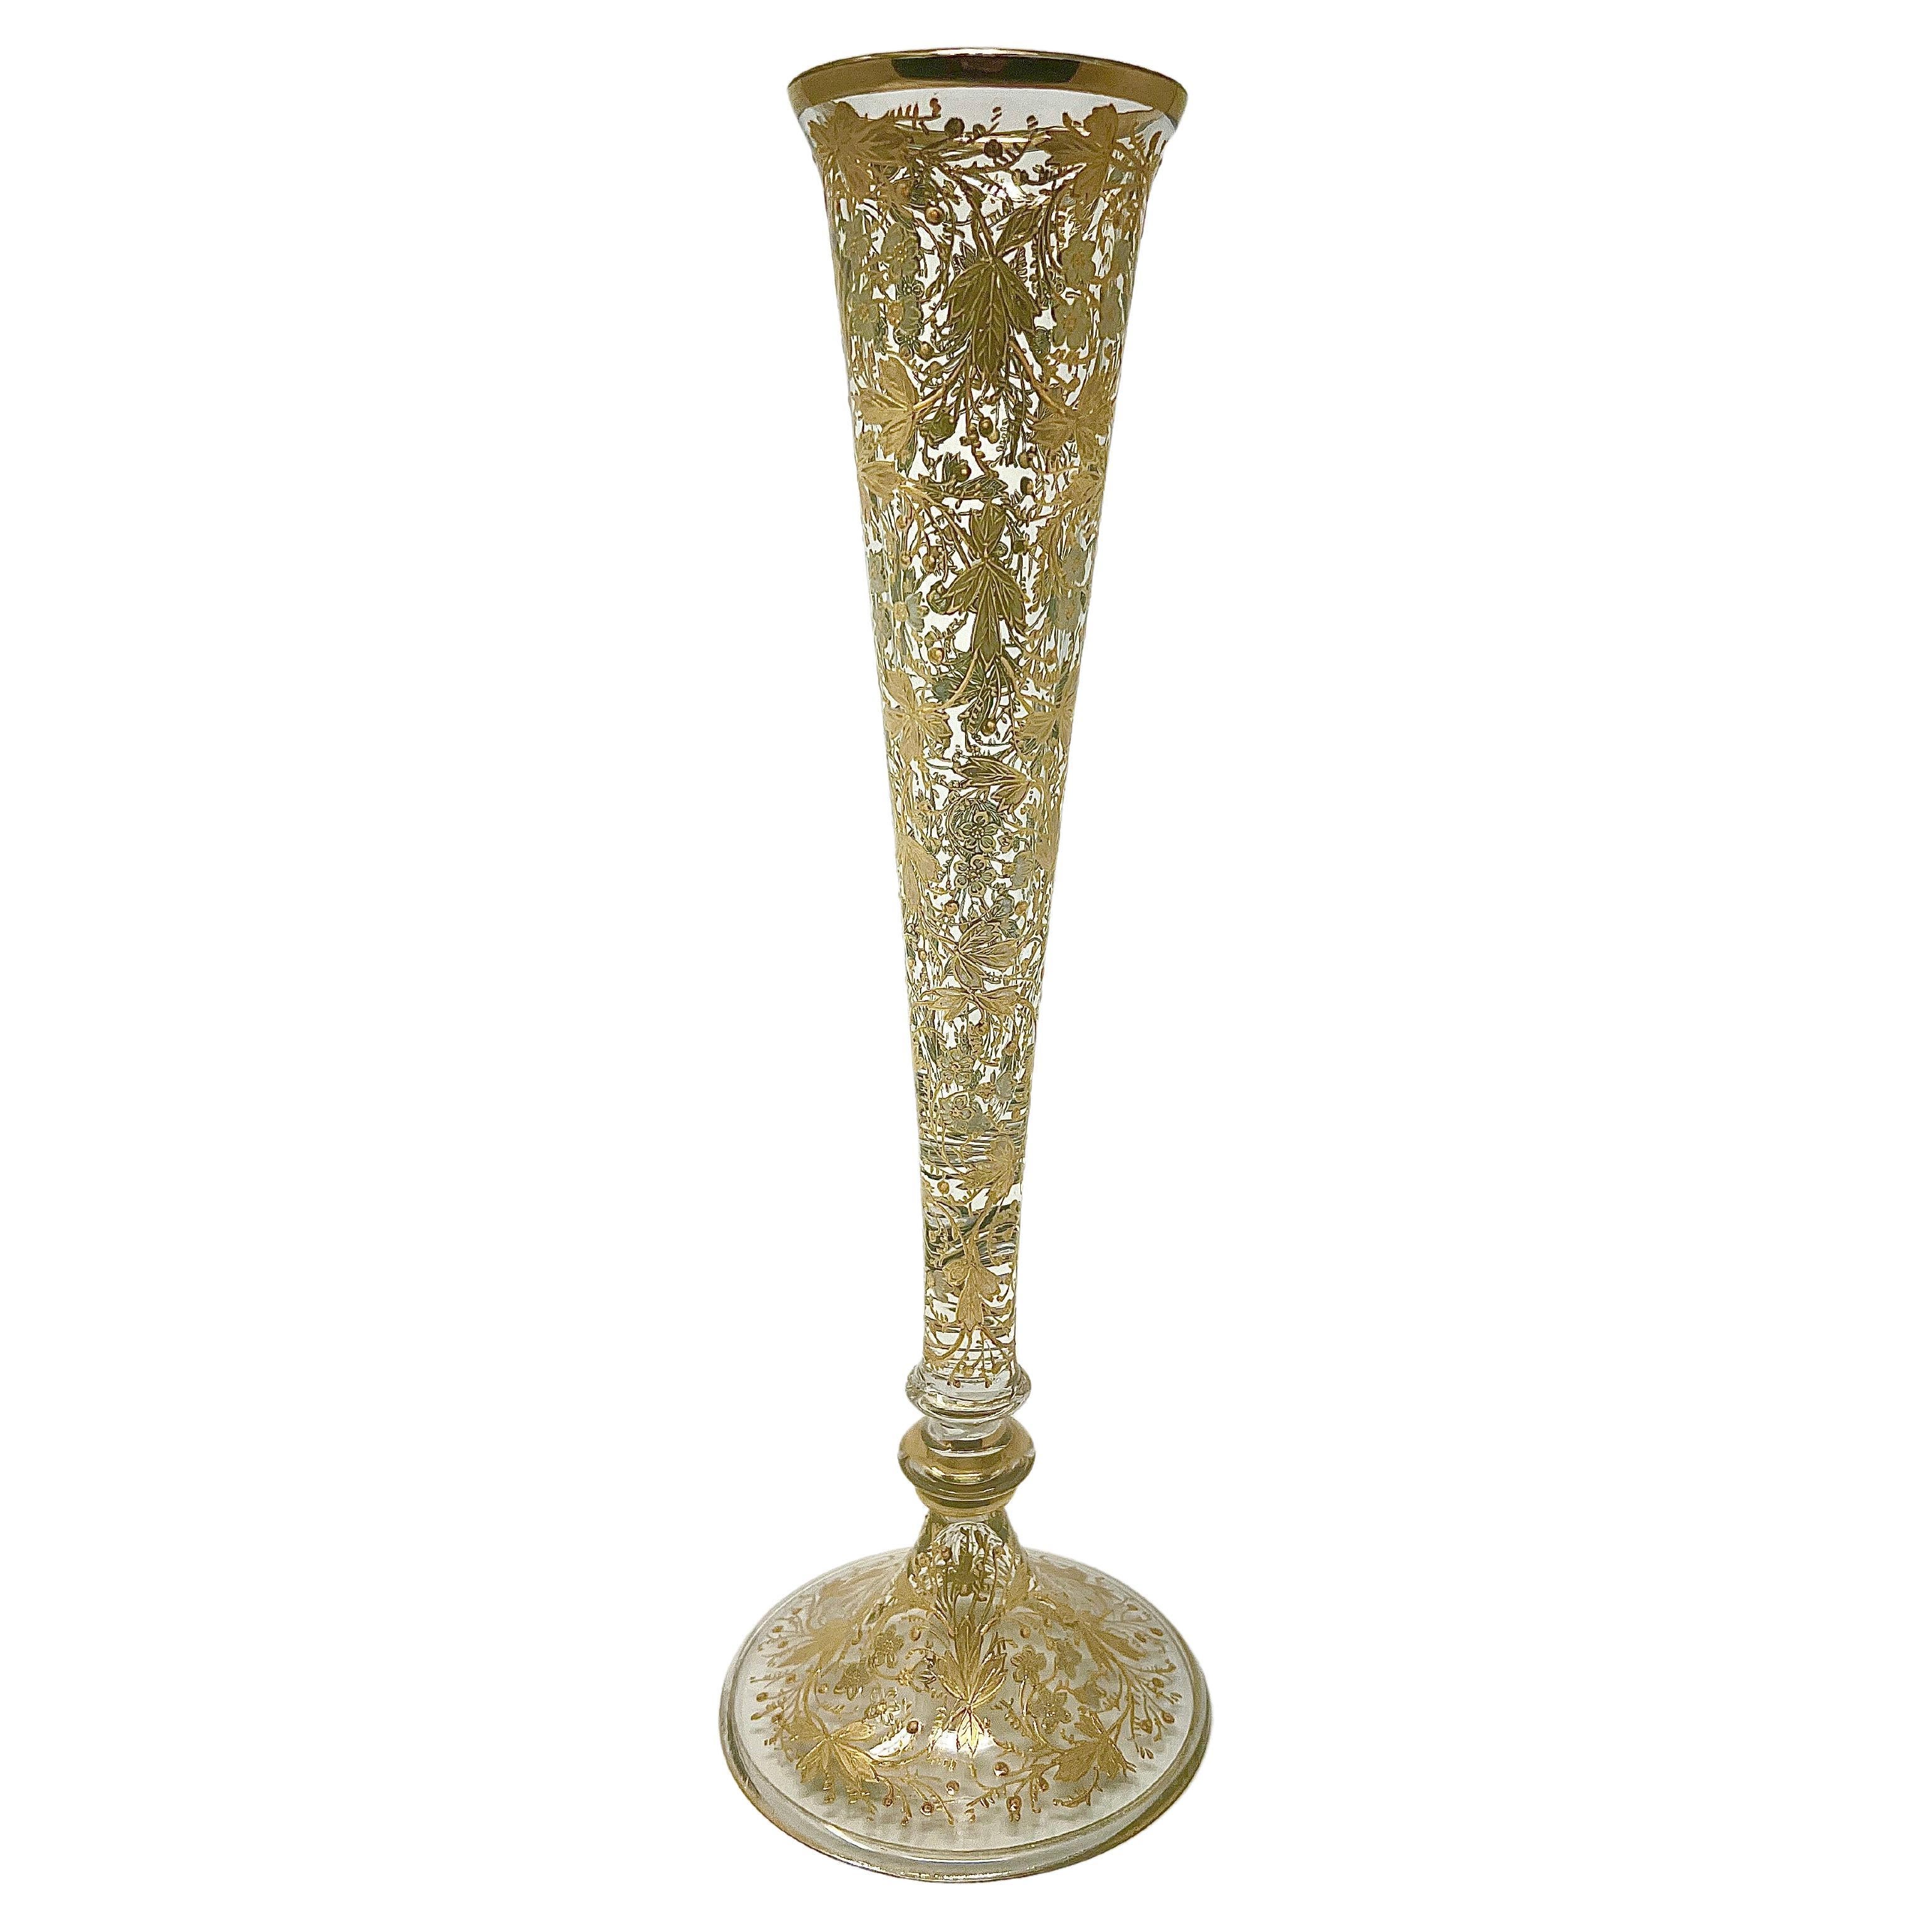 Antique 19th Century German Moser Glass Bud Vase with Gold Overlay, Circa 1885. For Sale